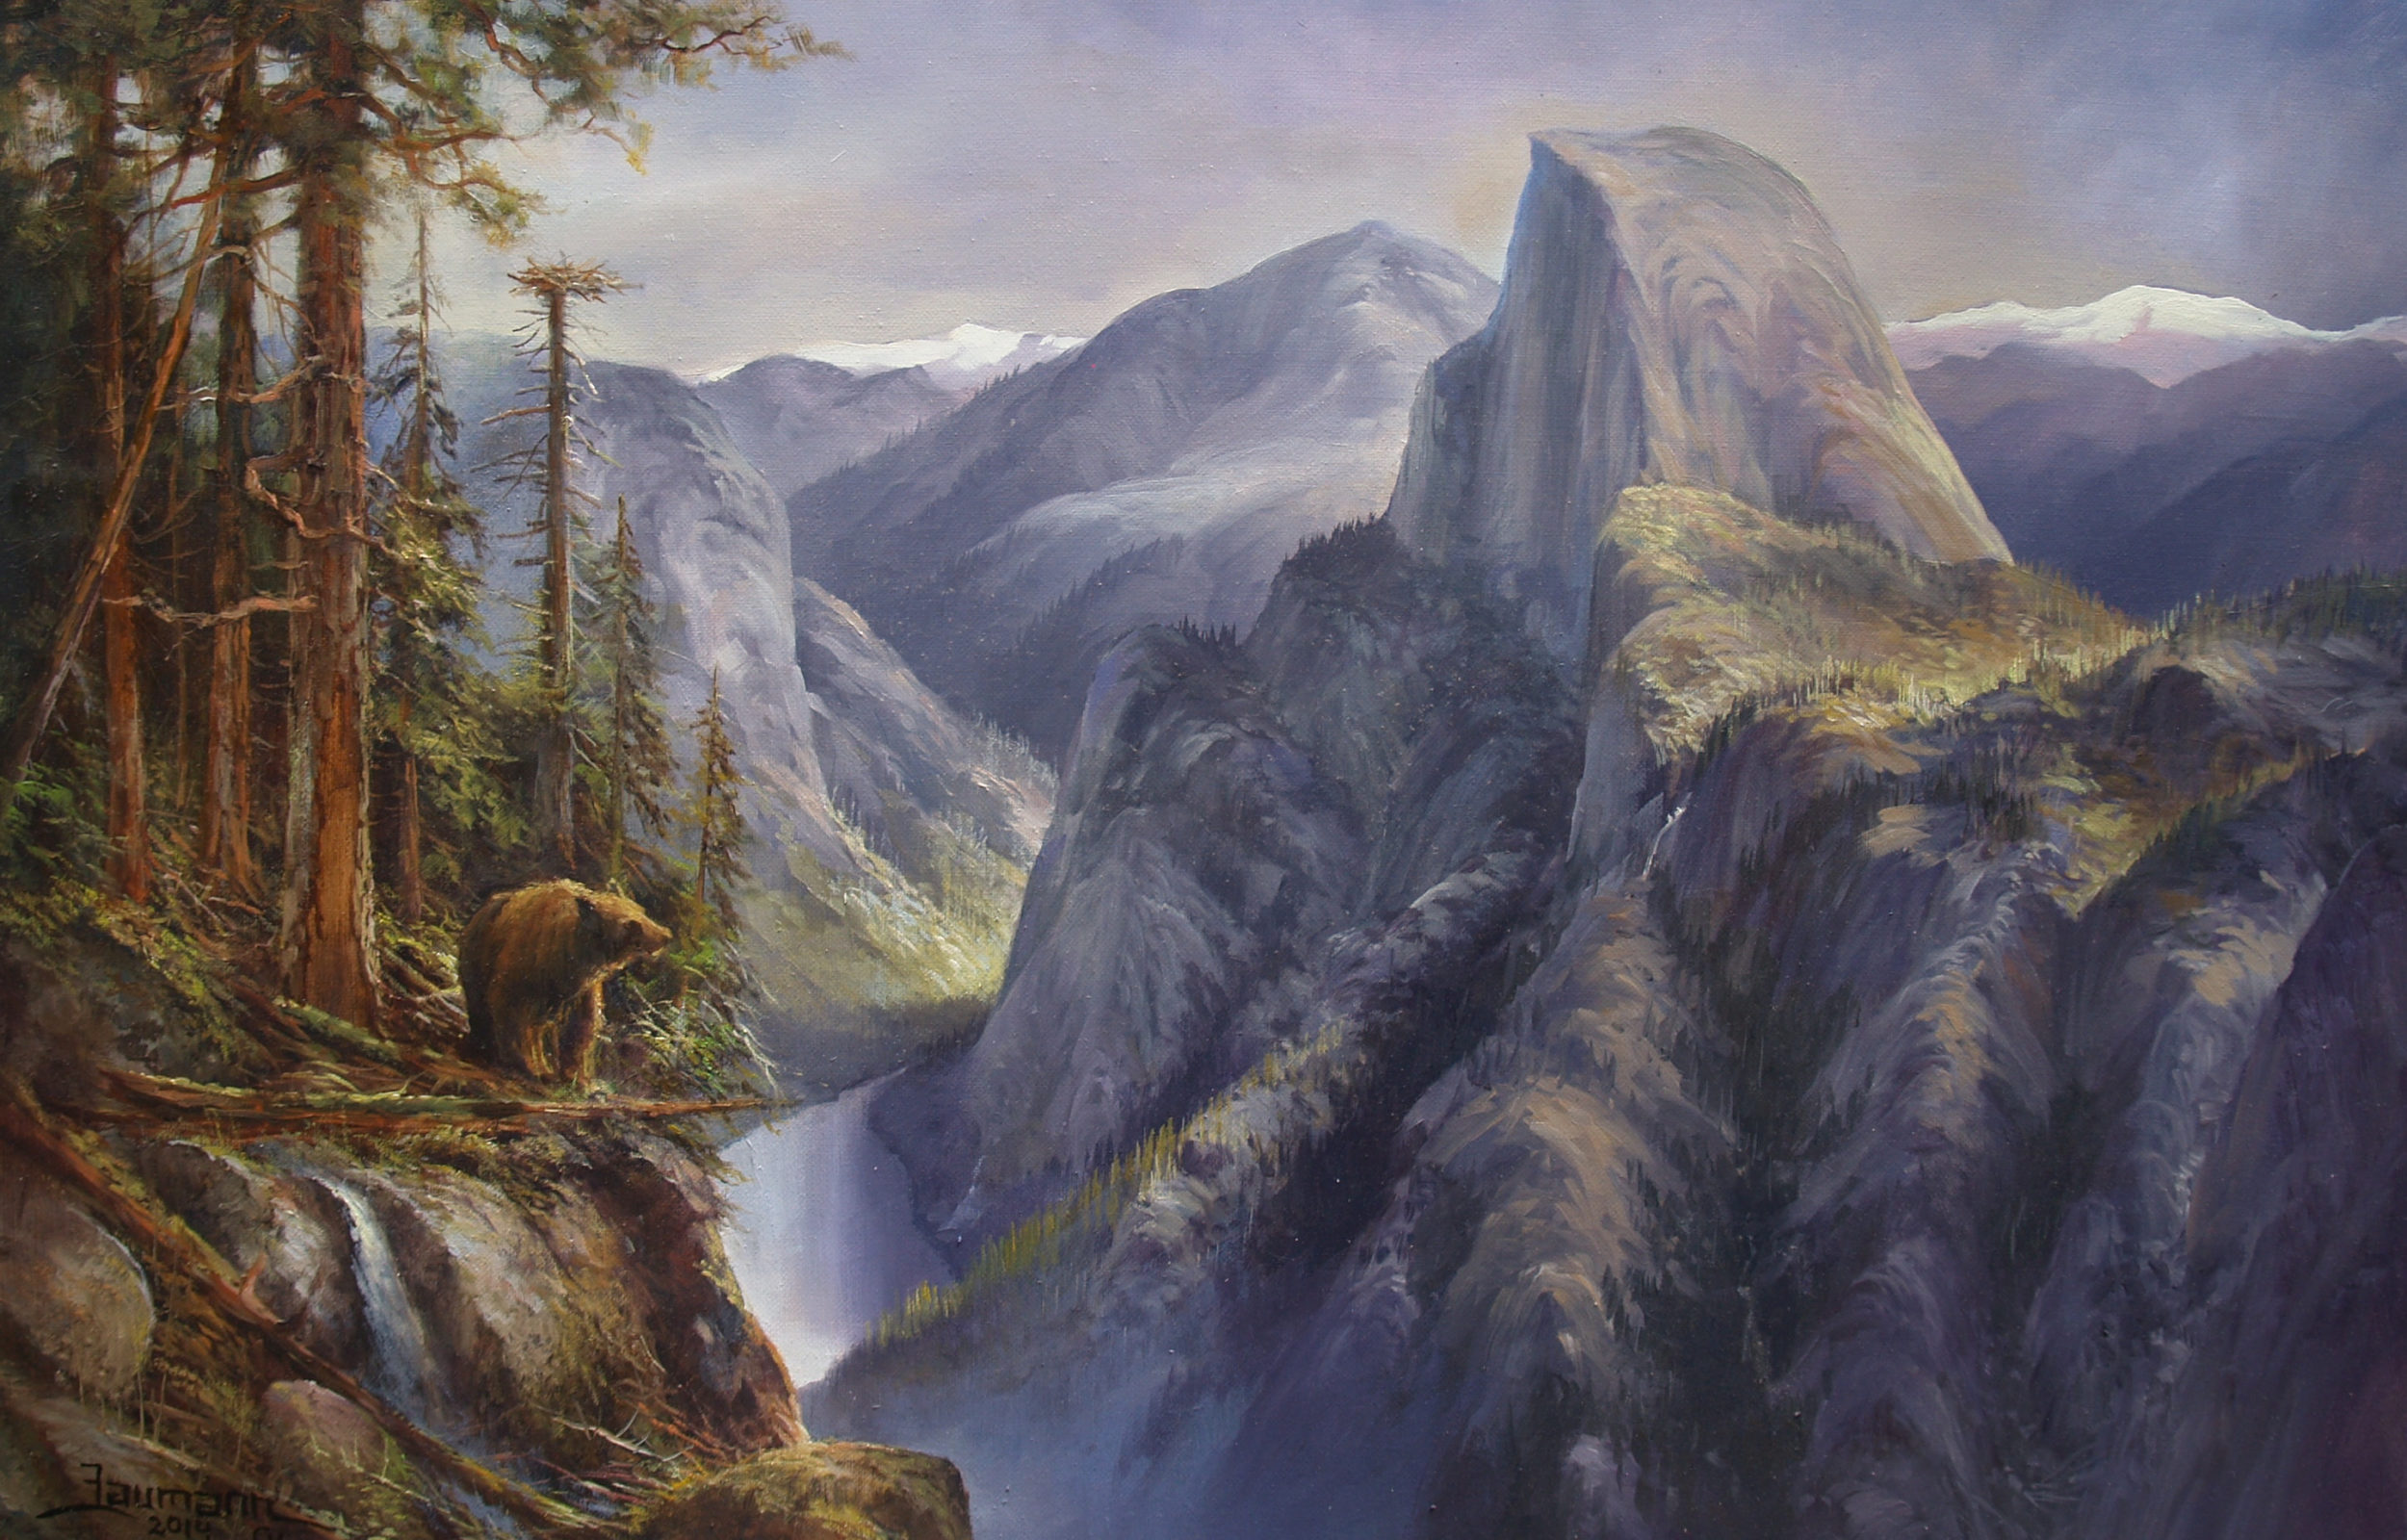 Free e-book : This is a painting by Stefan Baumann called On the Wings of an Osprey of Half Dome in Yosemite from the vantage point of an ospry flying in above the valley.